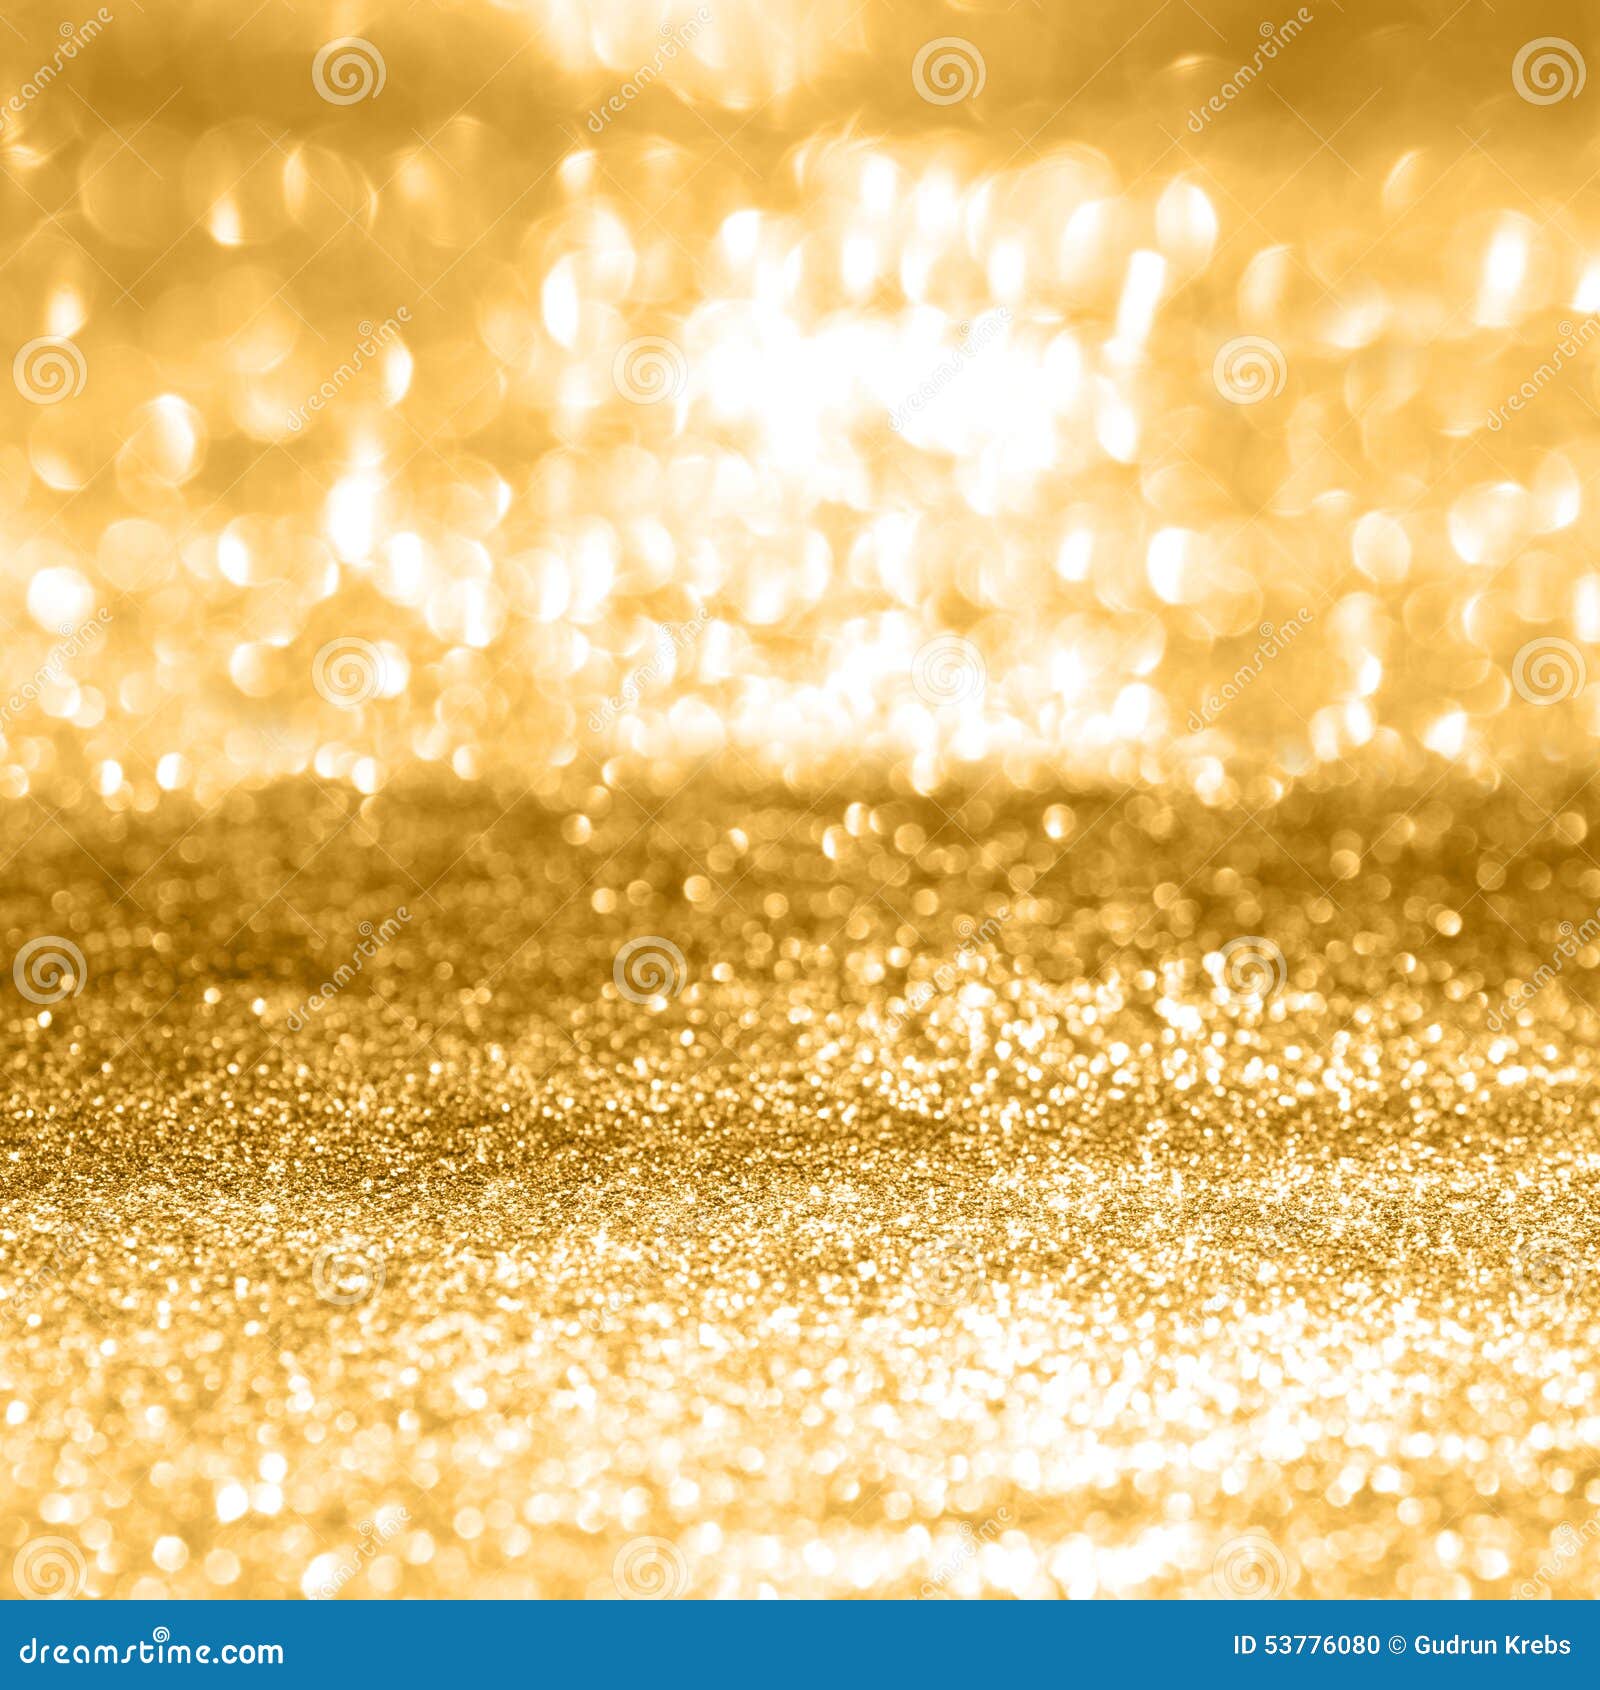 Abstract gold background stock photo. Image of design - 53776080